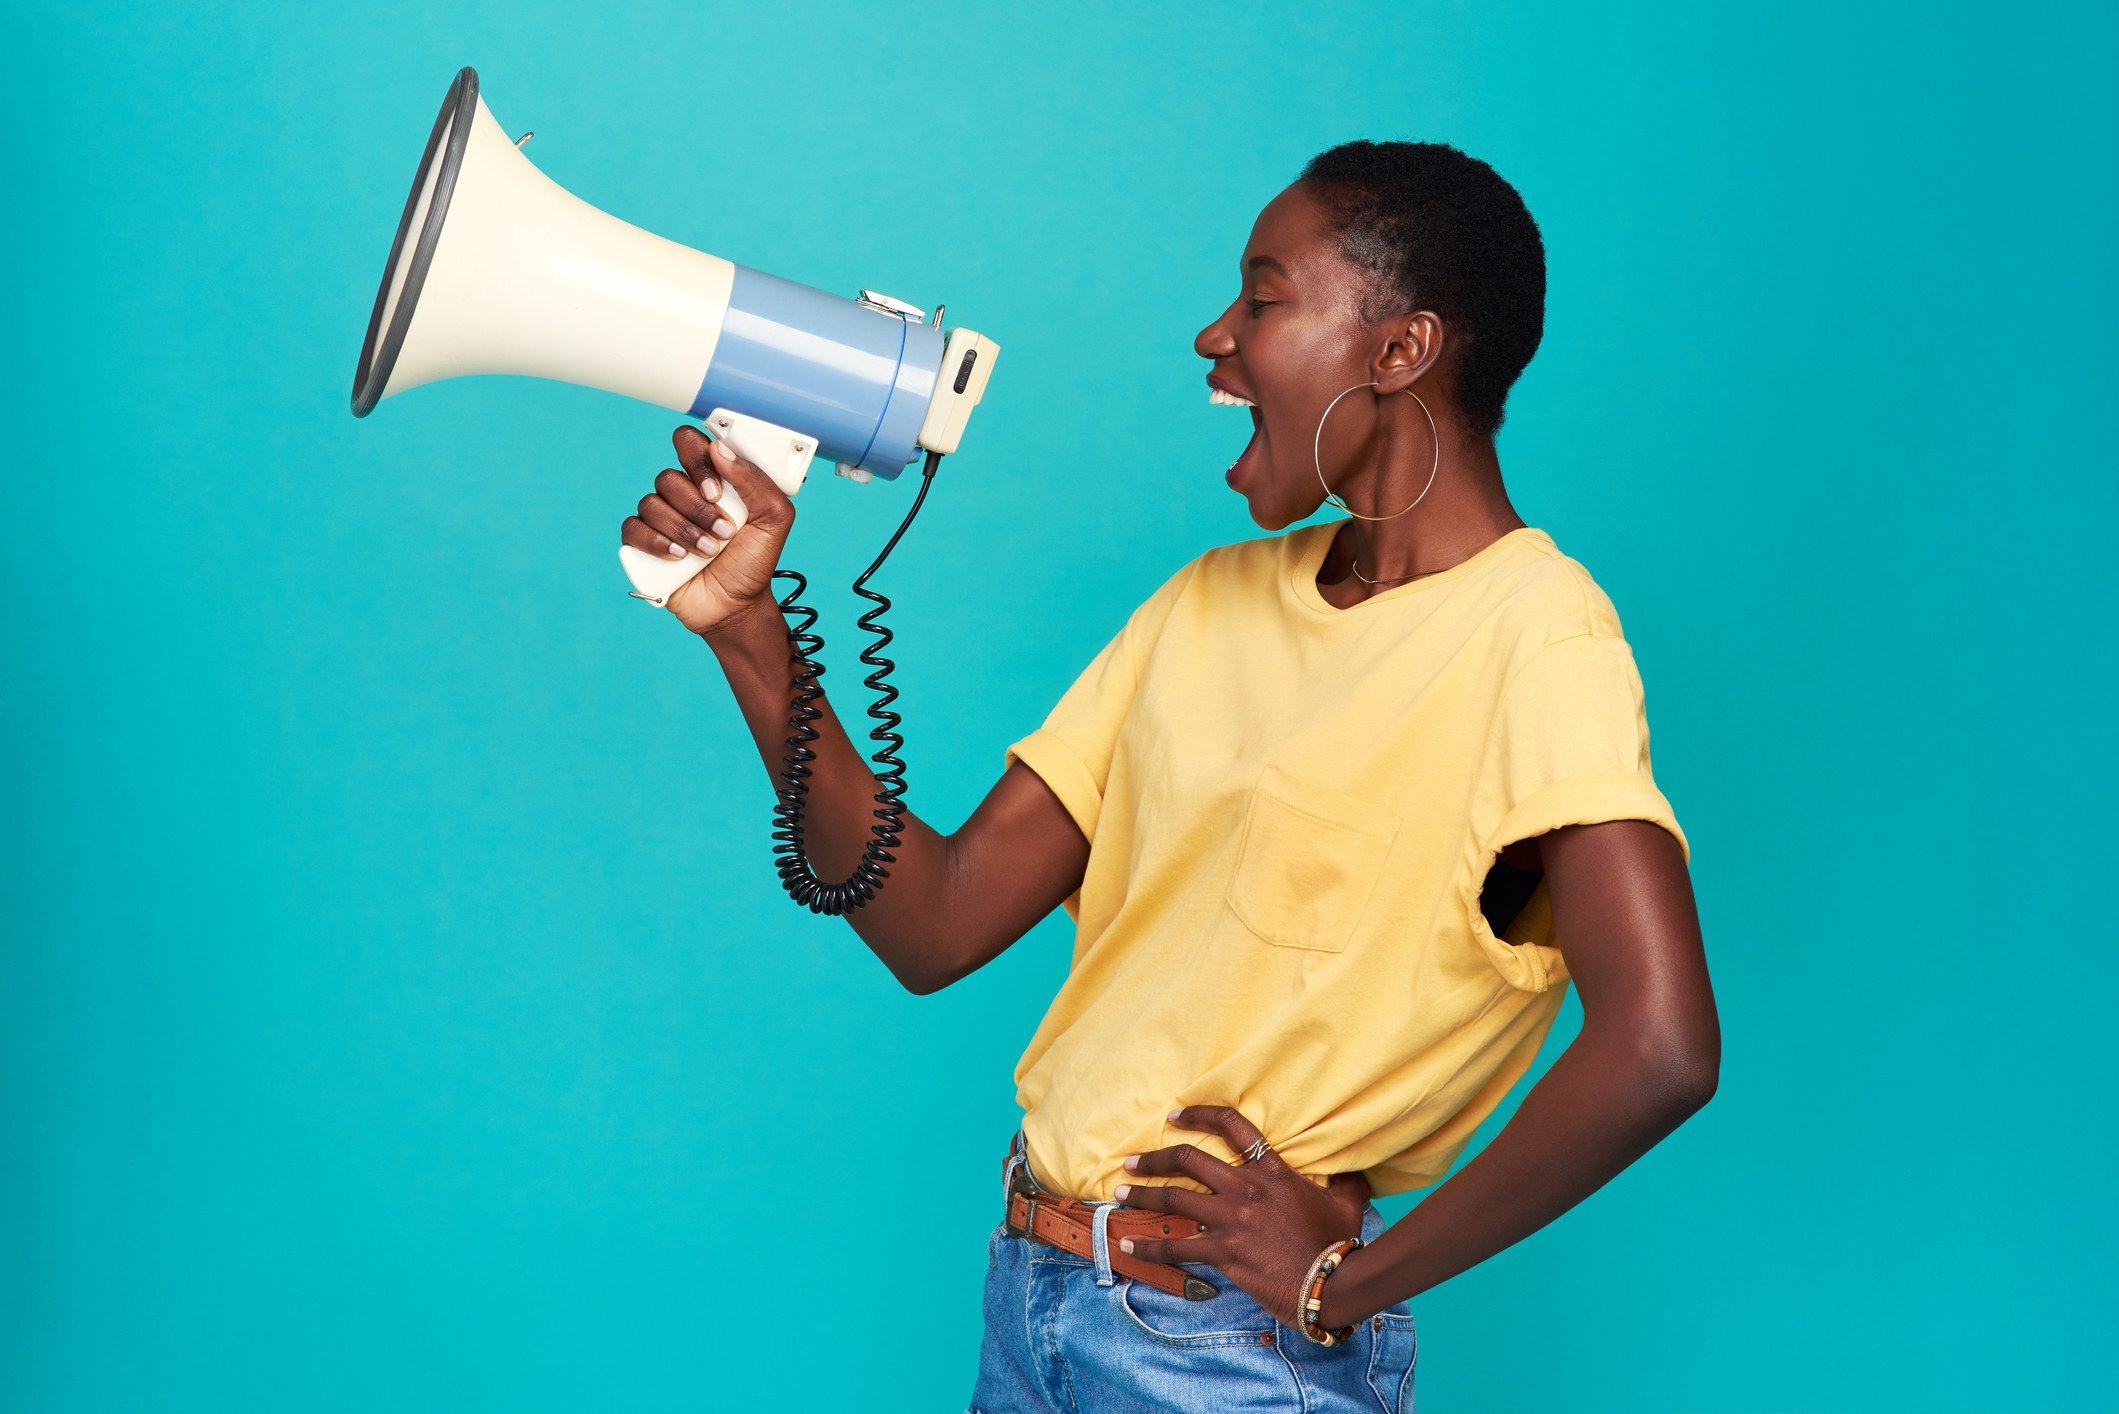 Studio shot of a young woman using a megaphone against a turquoise background